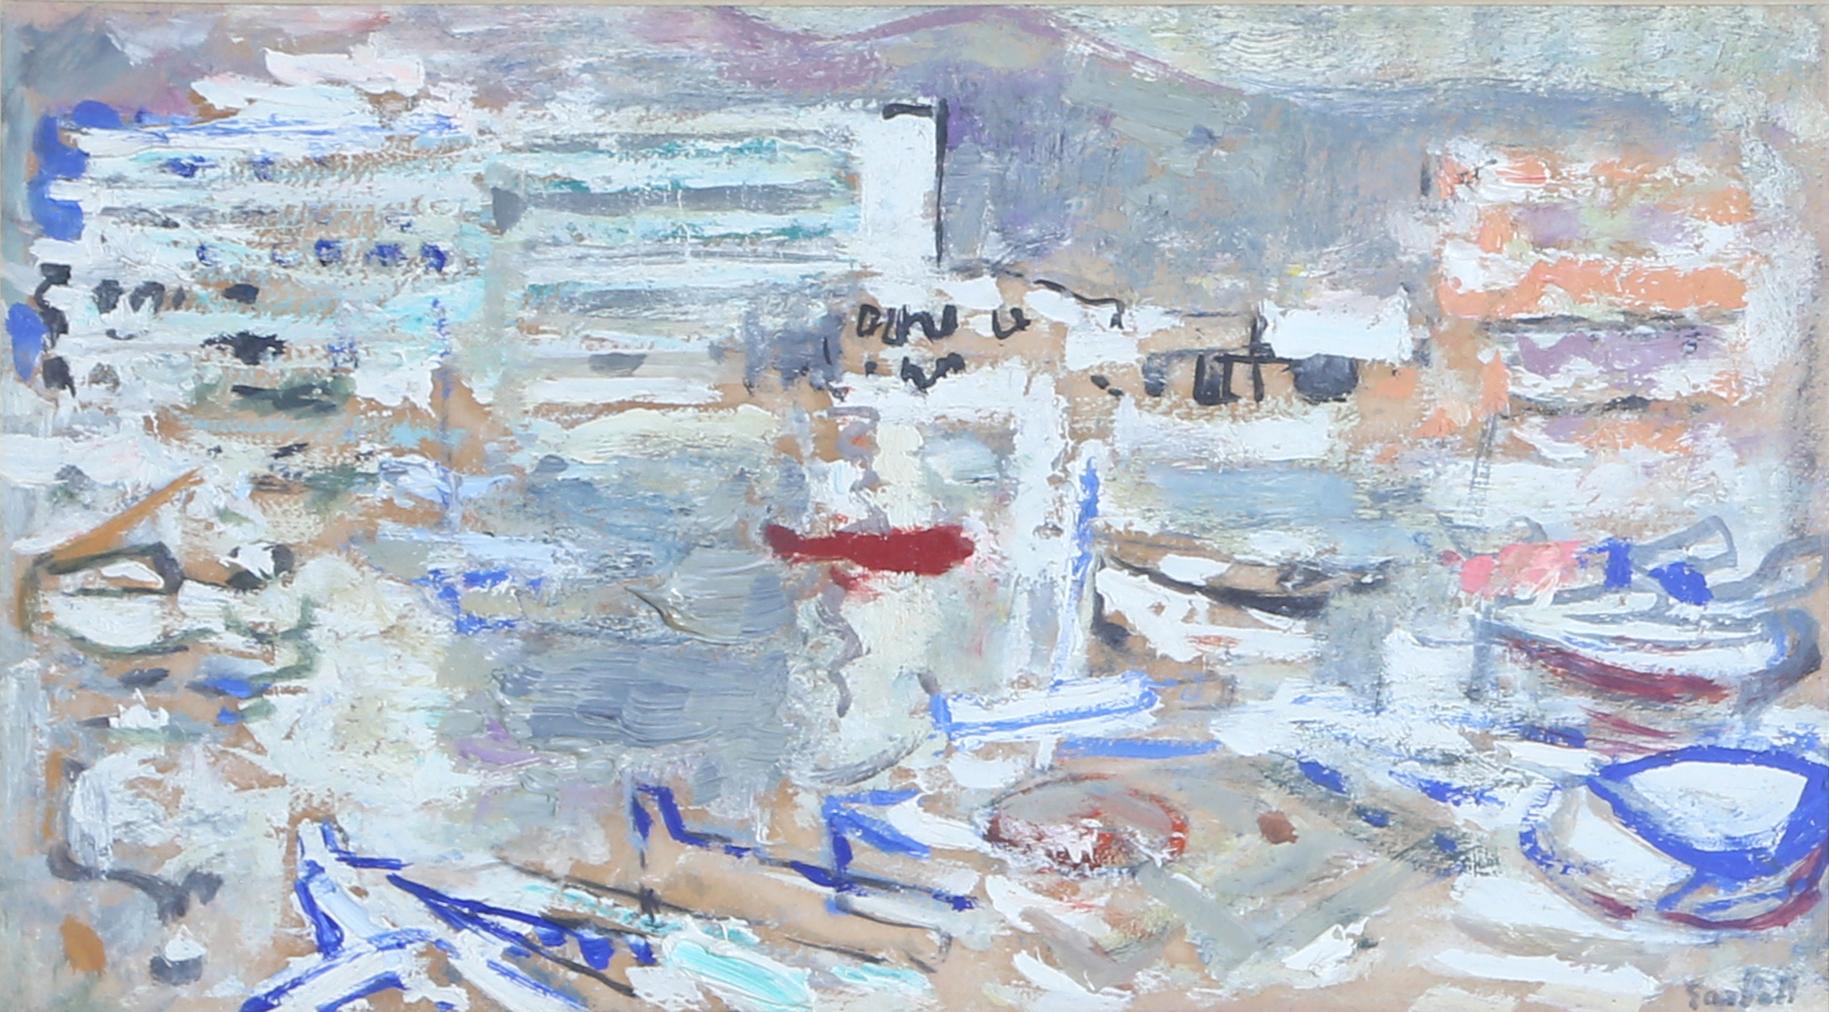 Marseille, Signed 1959 Gouache Painting by Alexandre Sacha Garbell